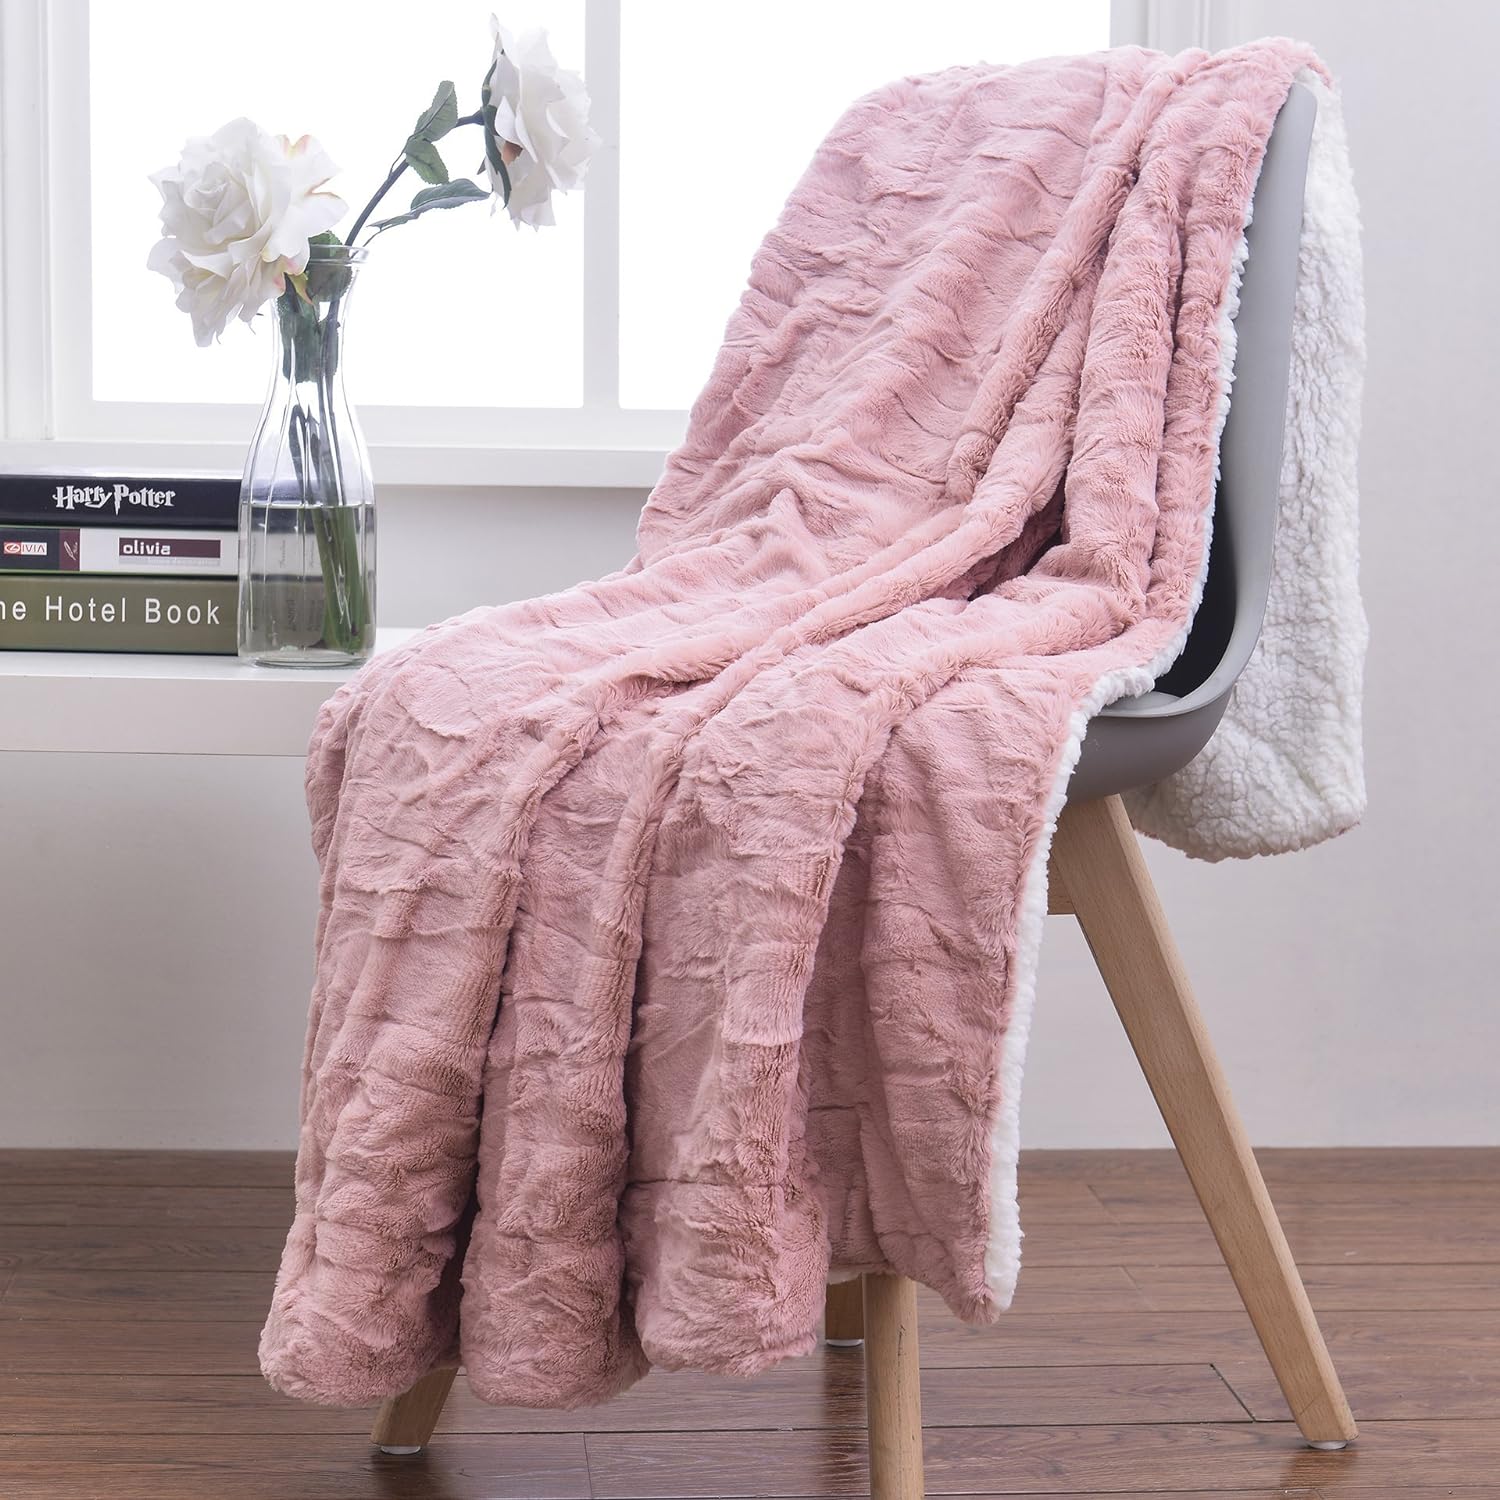 A cozy faux fur blanket in rose pink is draped over a chair next to a vase of fresh flowers